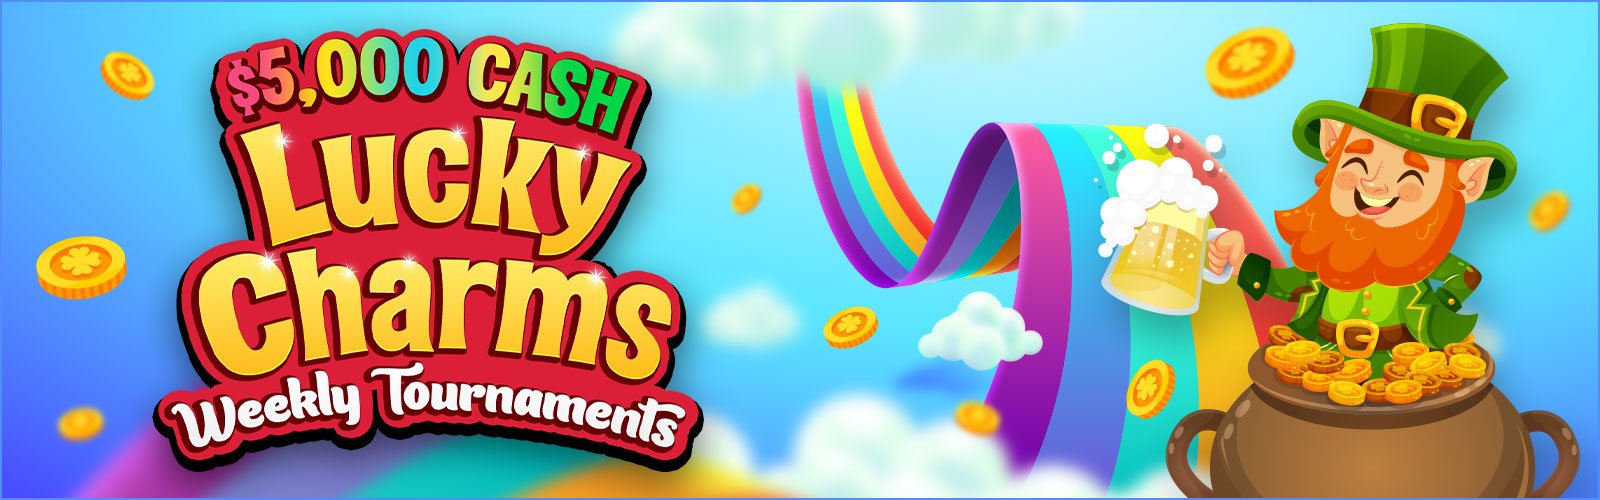 $5,000 CASH - Lucky Charms Weekend Tournaments